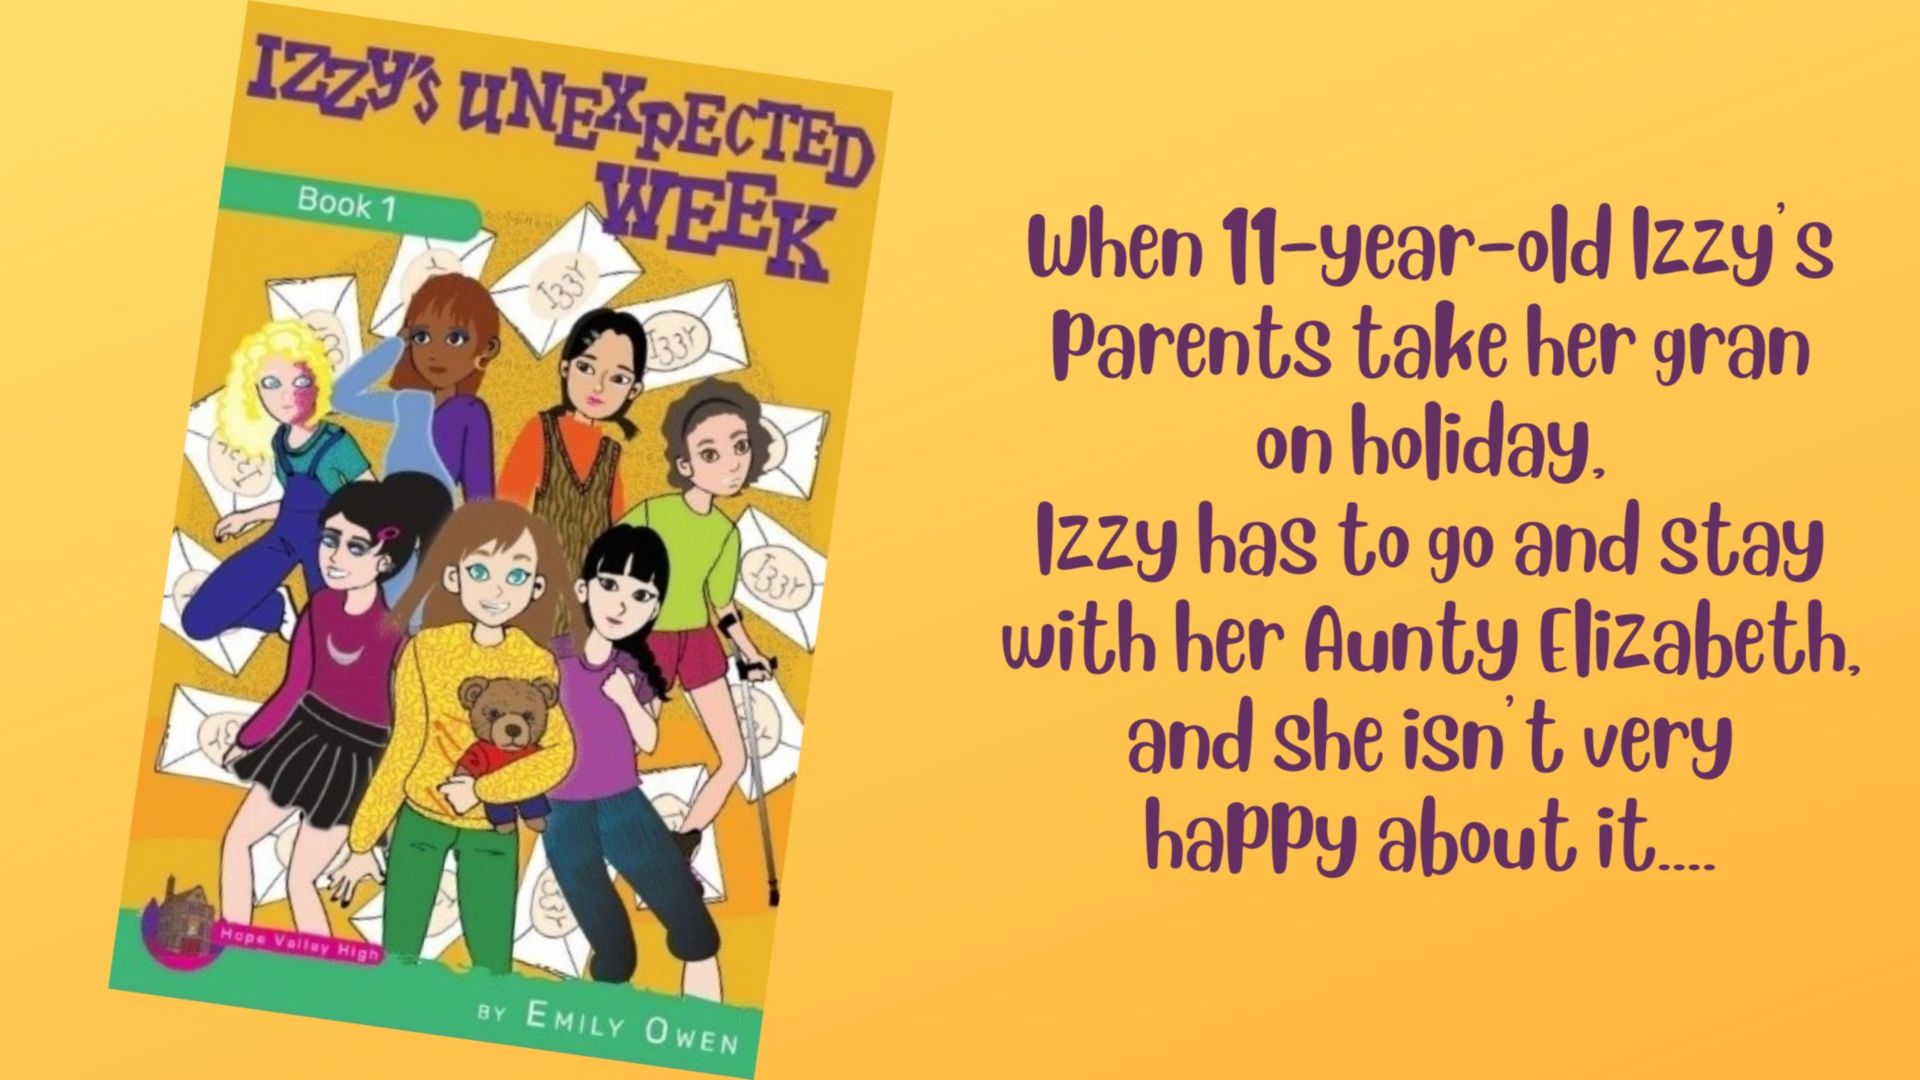 An interview with Emily Owen, author of 'Izzy's Unexpected Week'